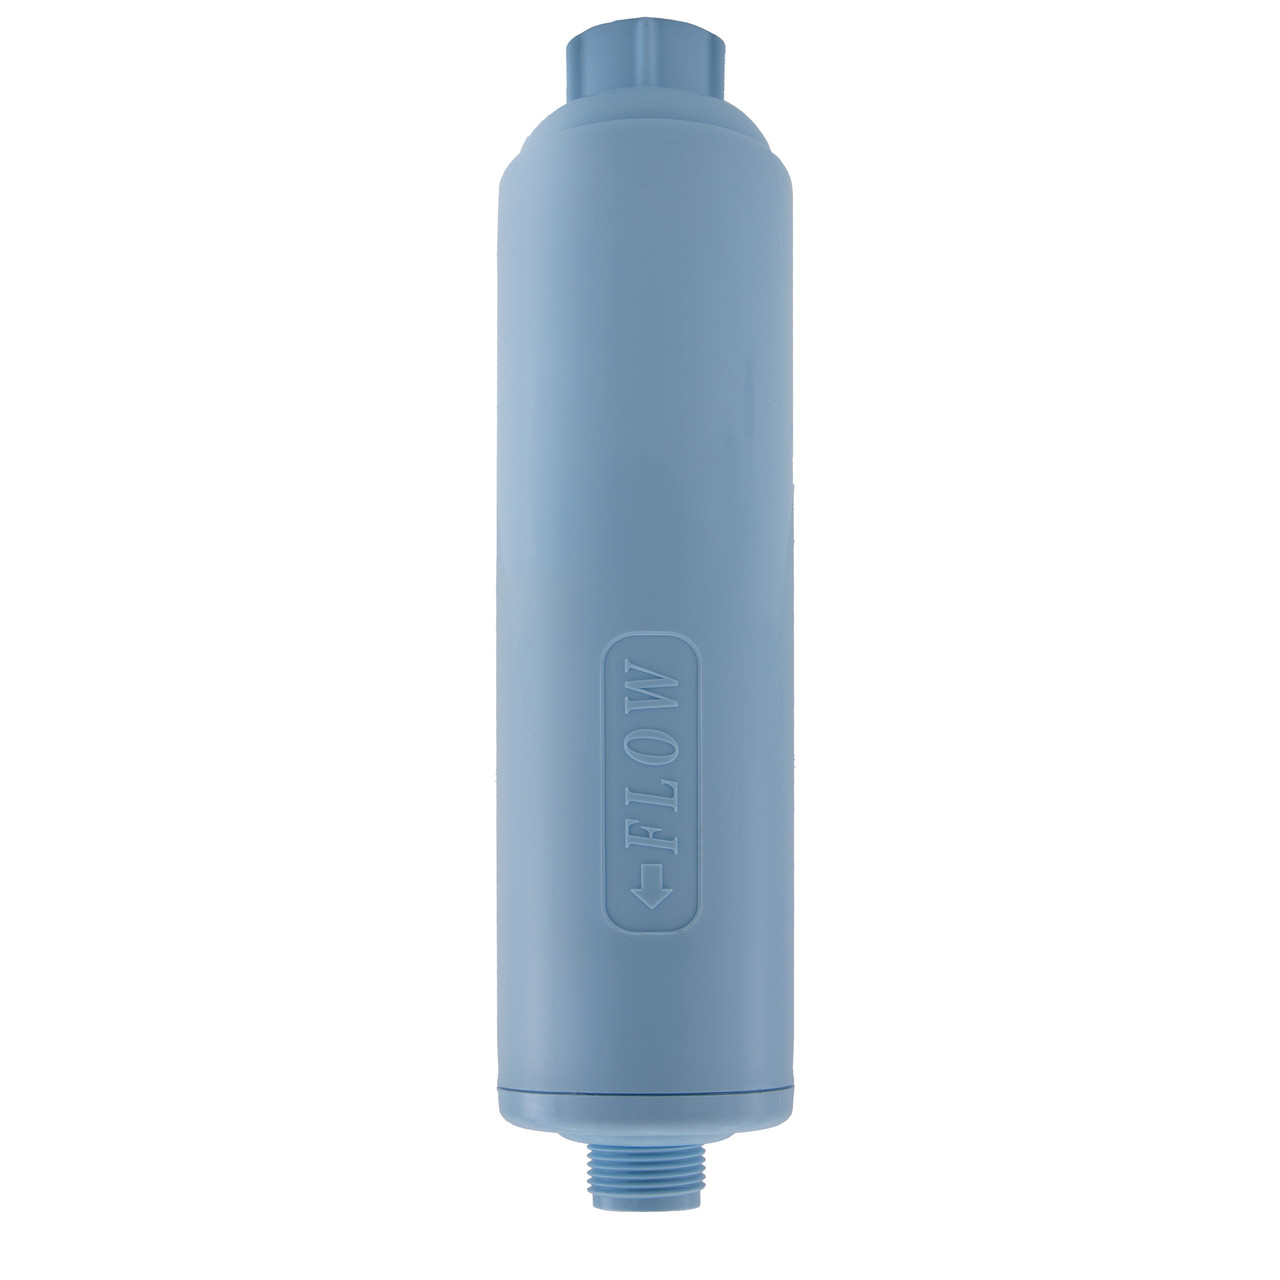 RV Water Filter with Flexible Hose Adapter